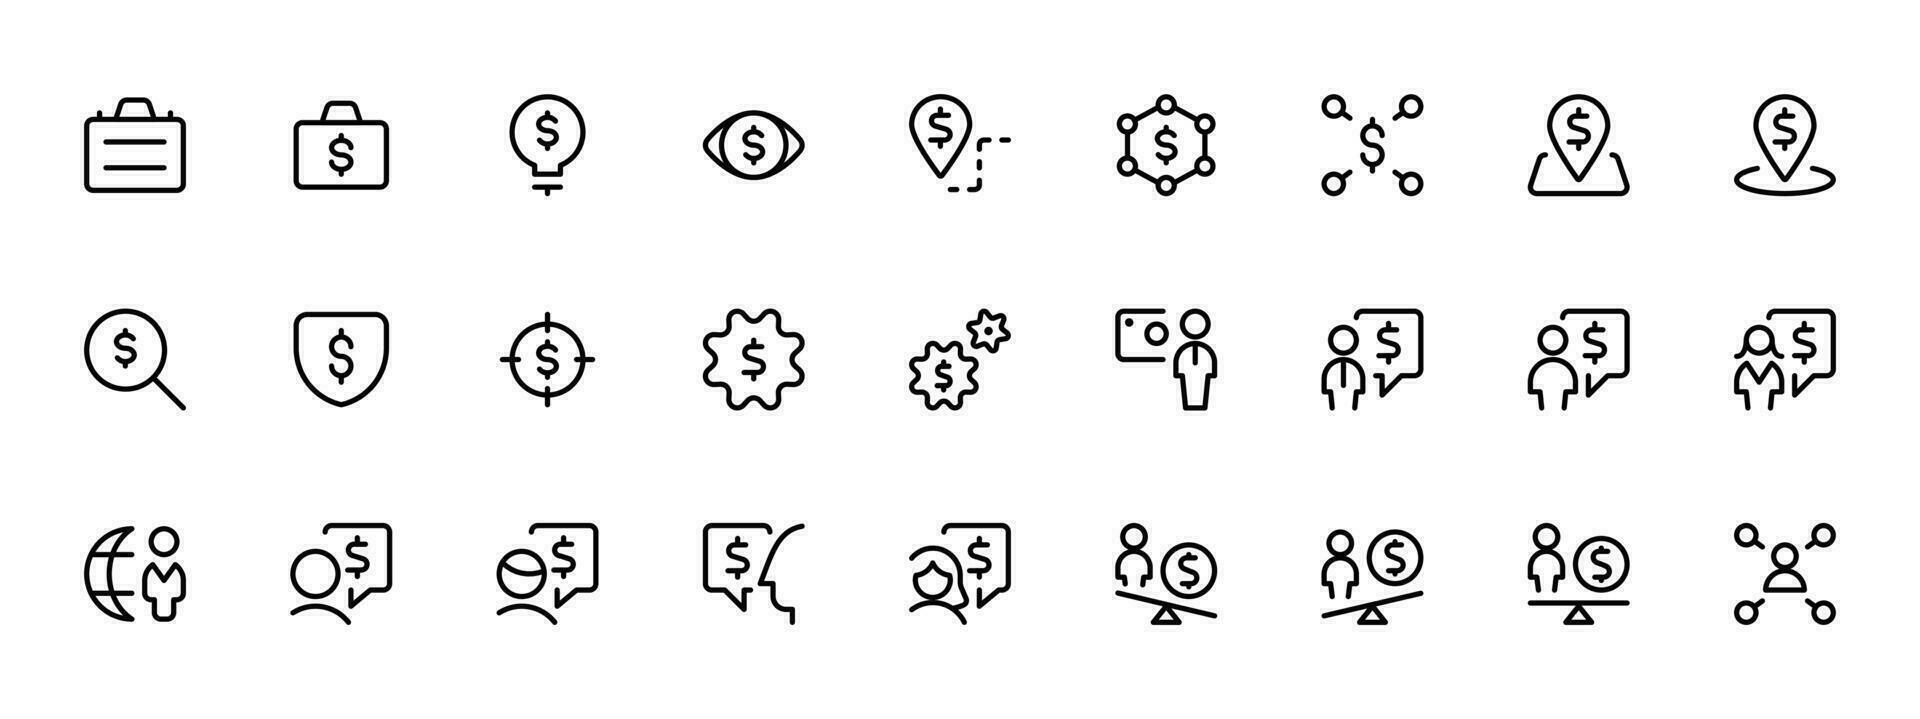 Business icons. Business and Finance web icons in line style. Money, bank, contact, infographic. Icon collection. Vector illustration. can be used for web, logo, UI,  UX